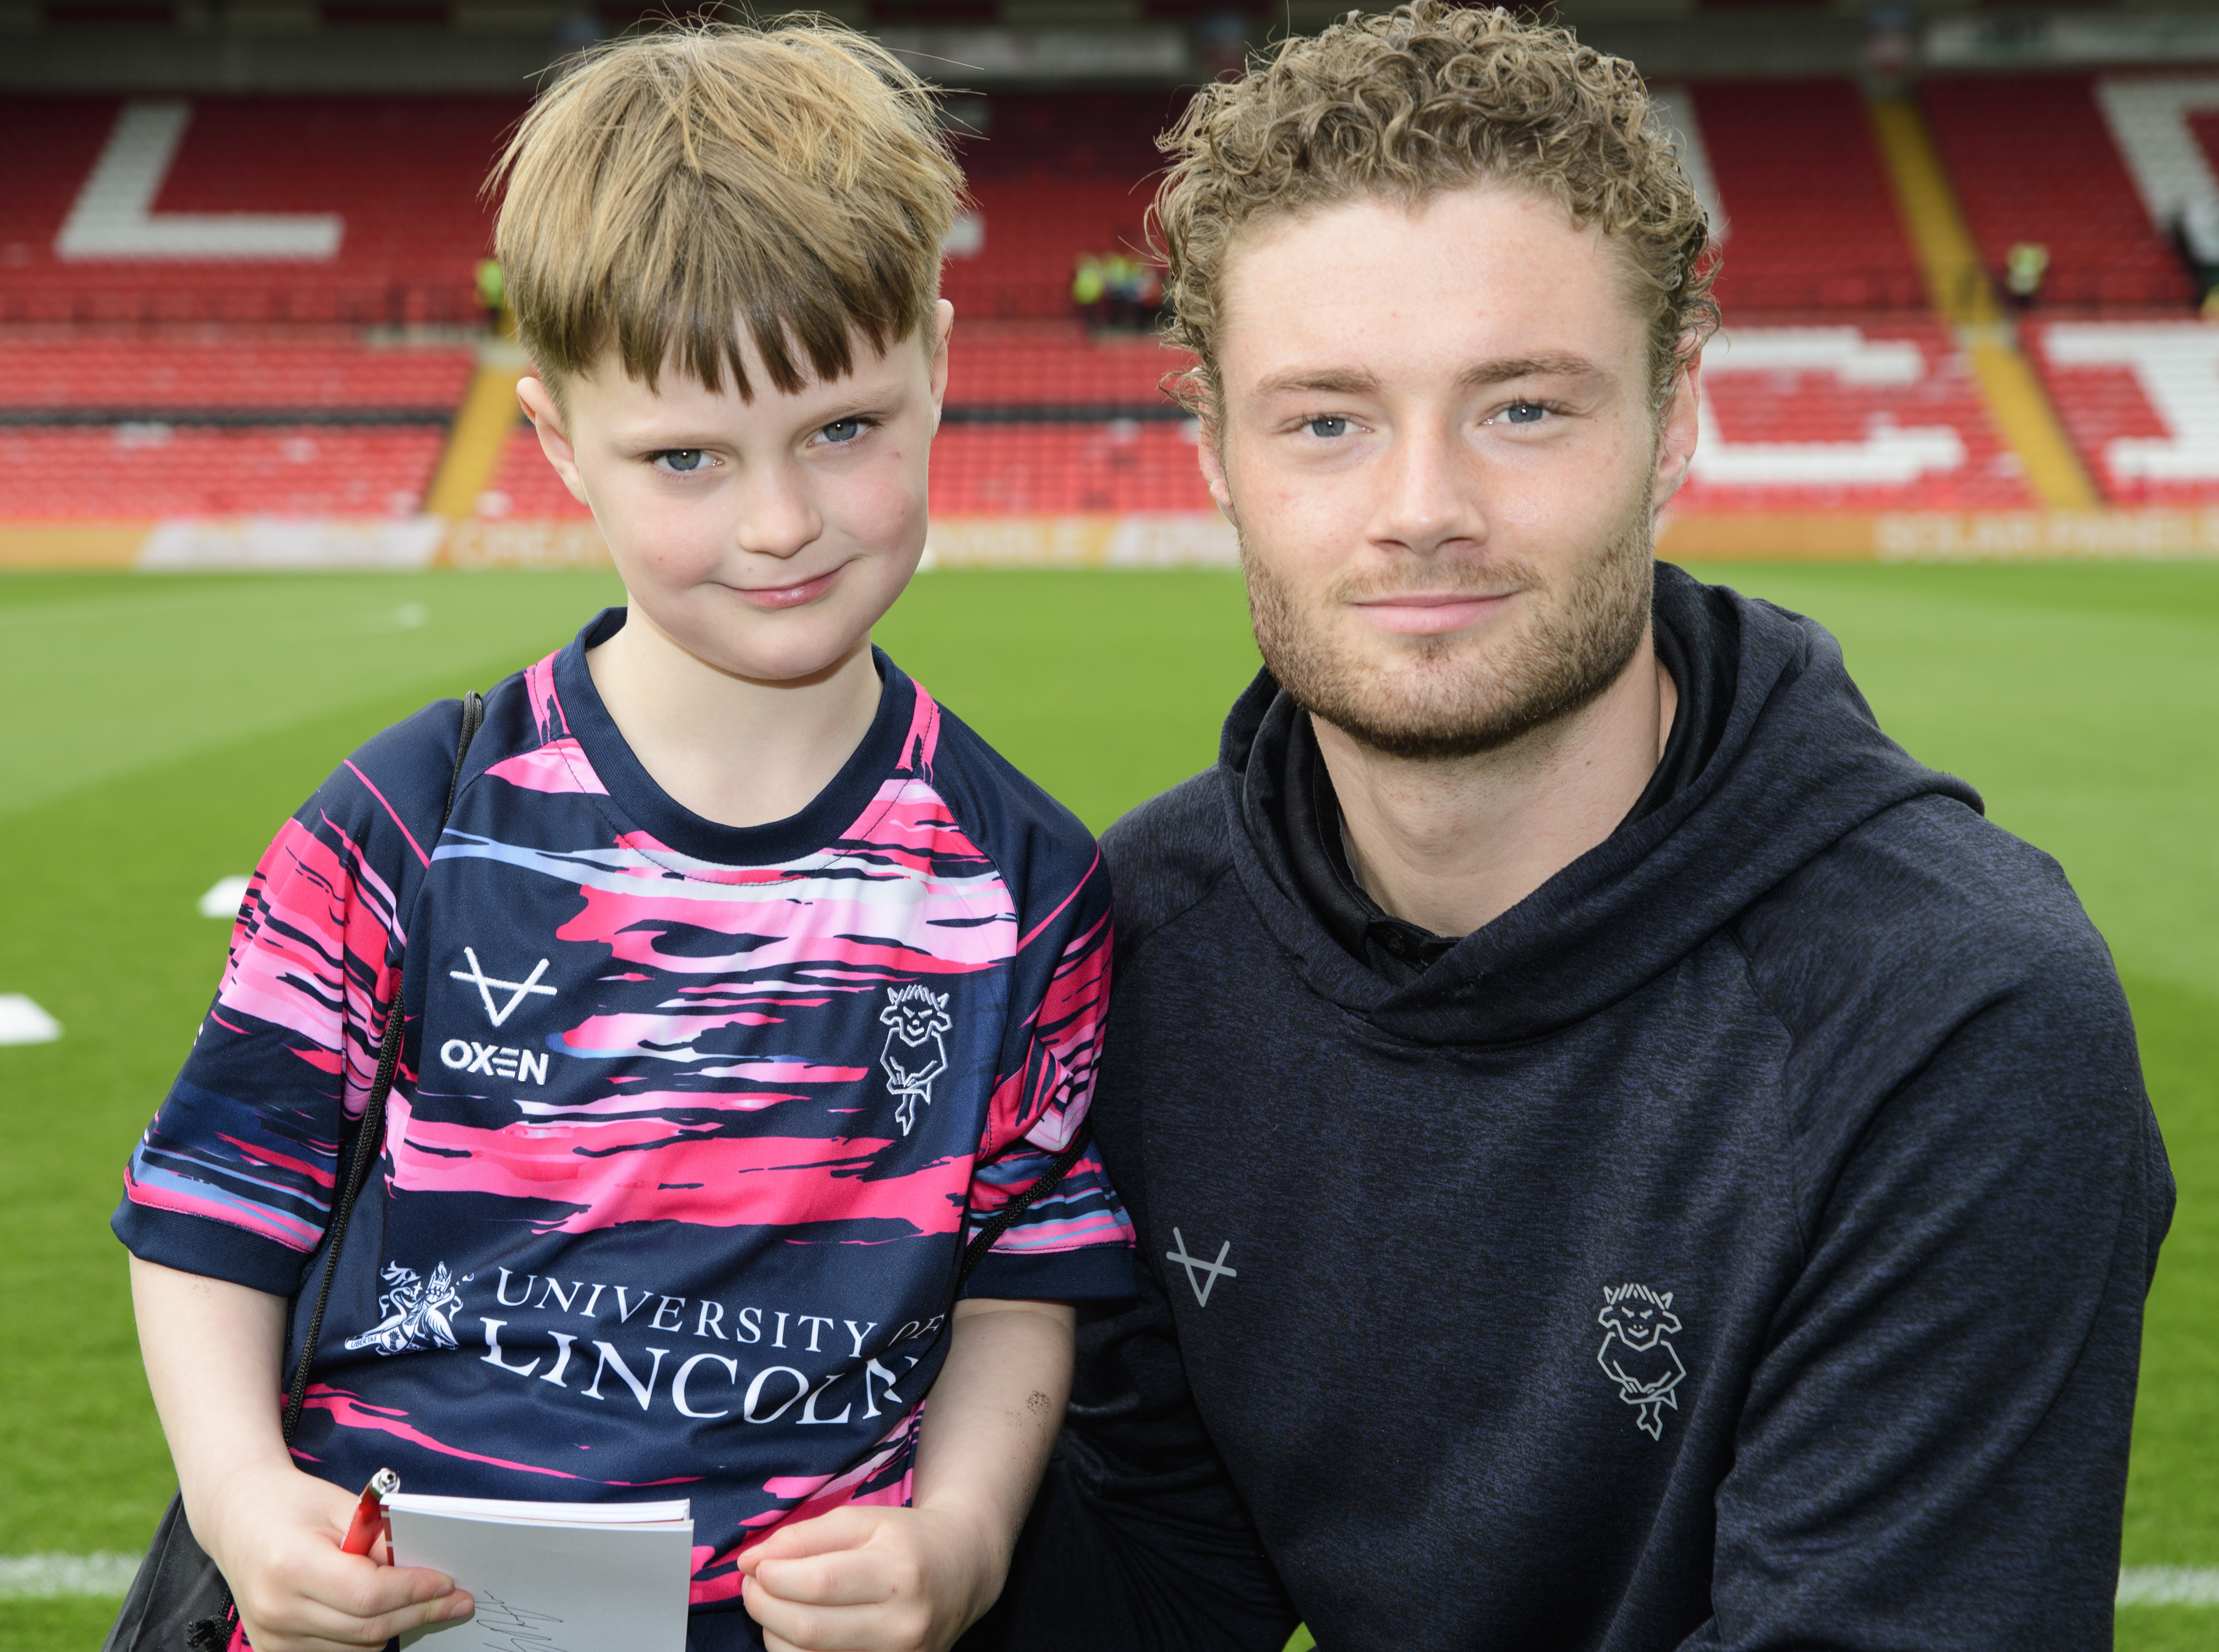 Lincoln City goalkeeper Lukas Jensen poses with a young fan, who is wearing a blue and pink replica shirt